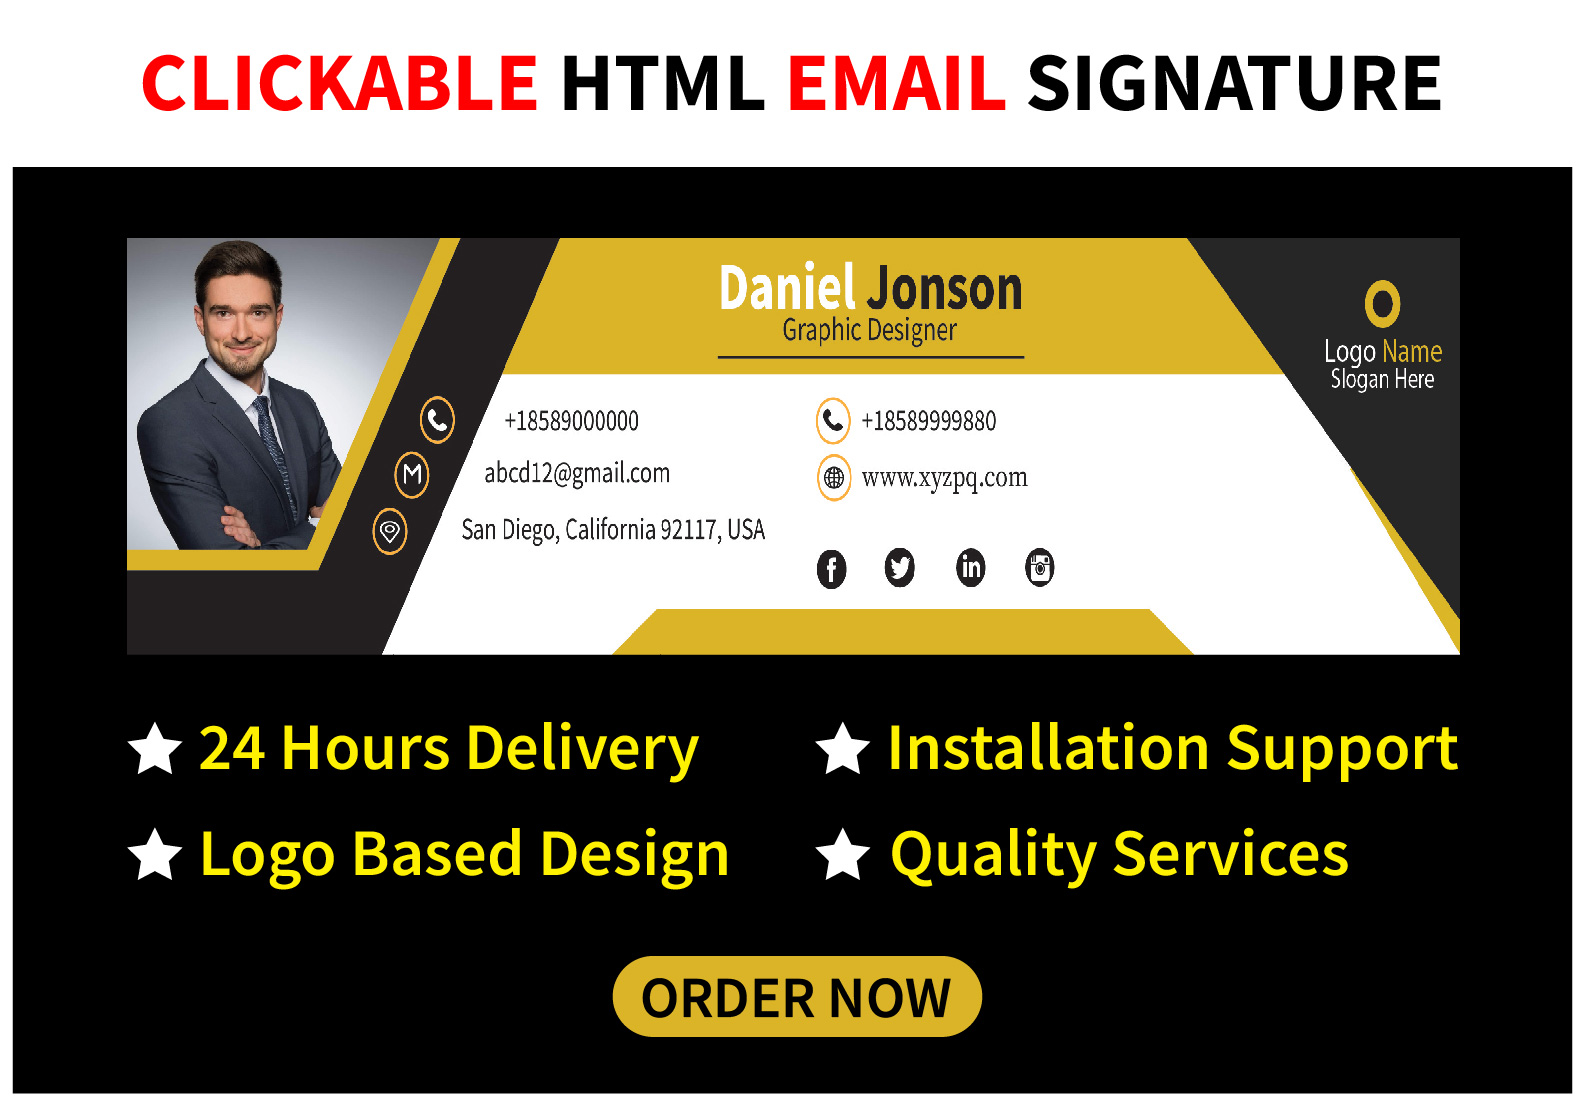 I will create or design a professional clickable html email signature